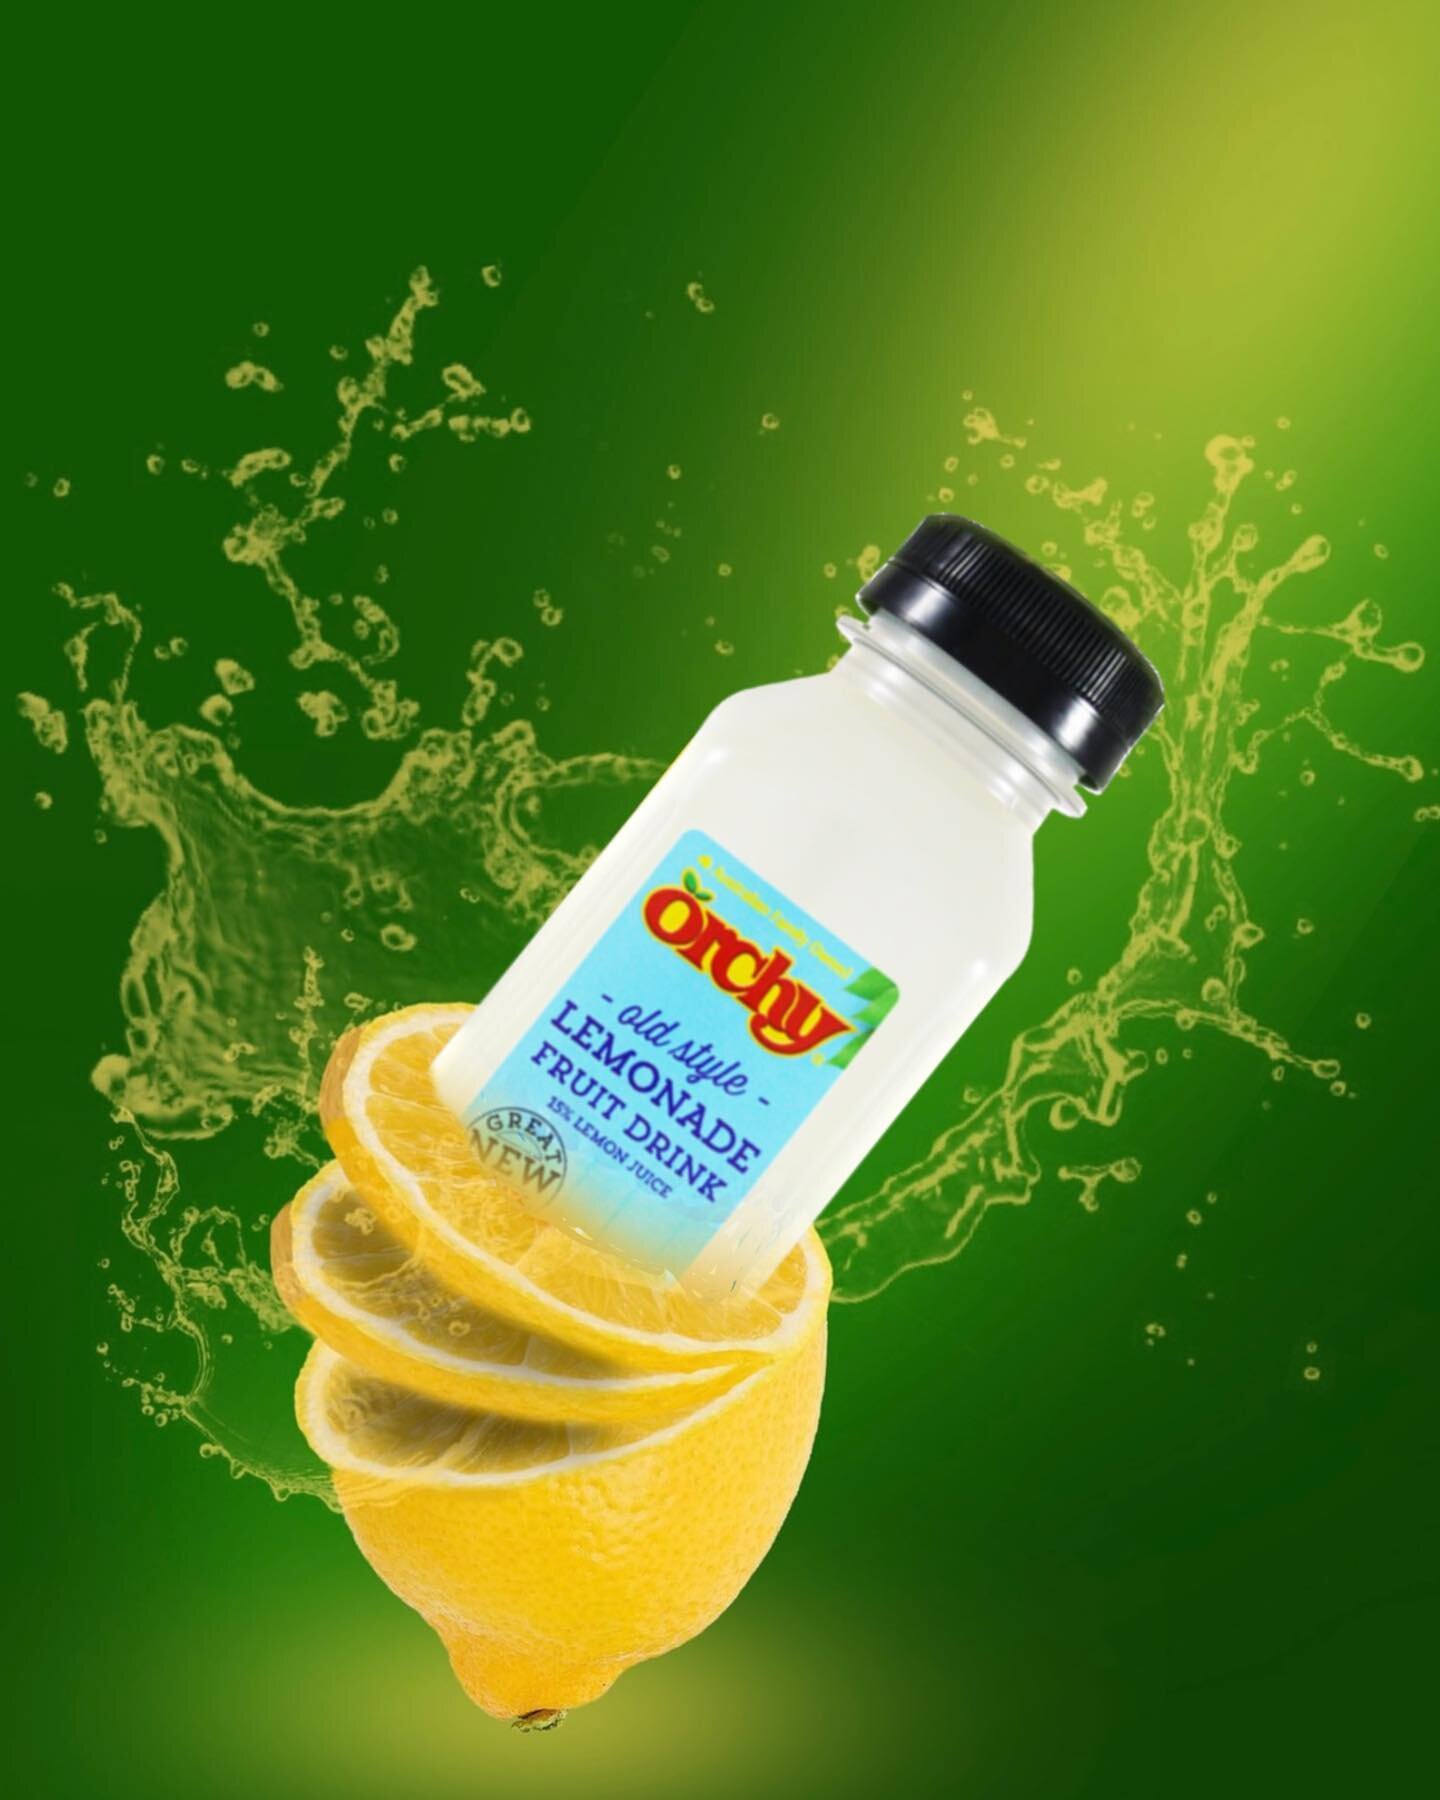 Have you tried our zesty lemonade yet? 

#orchyfeuitjuice #orchyjuice #lemonade #orchy #lemons #fruit #juice #aussiemade #madelocally #instagram #facebook